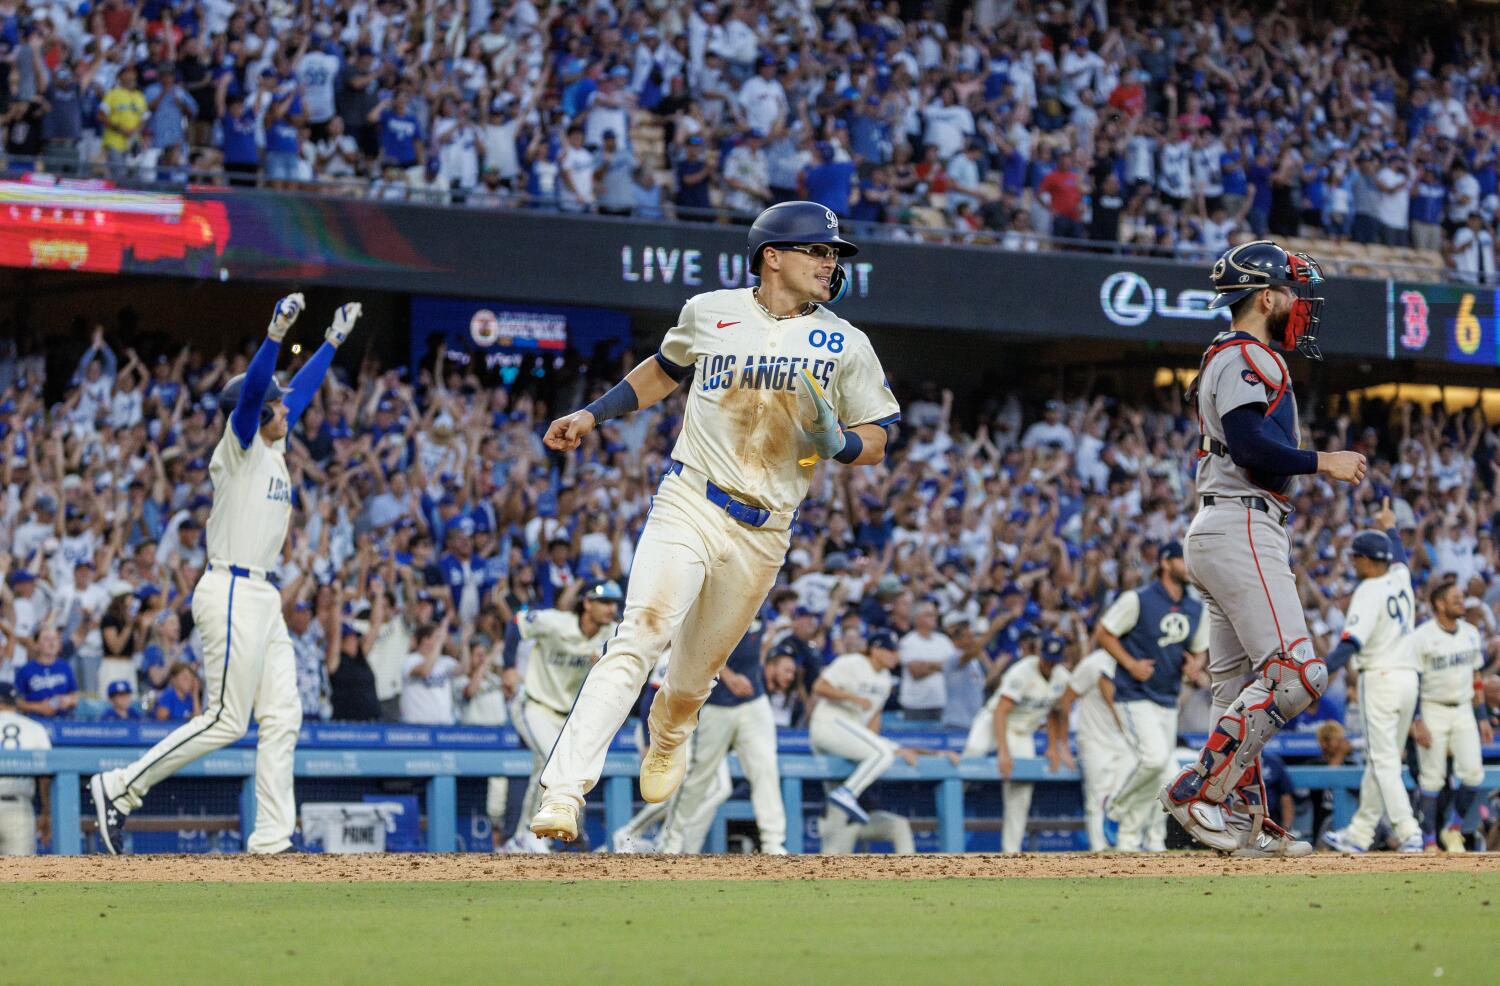 Will Smith's walk-off single and Kiké Hernández's heroics lift Dodgers over Boston